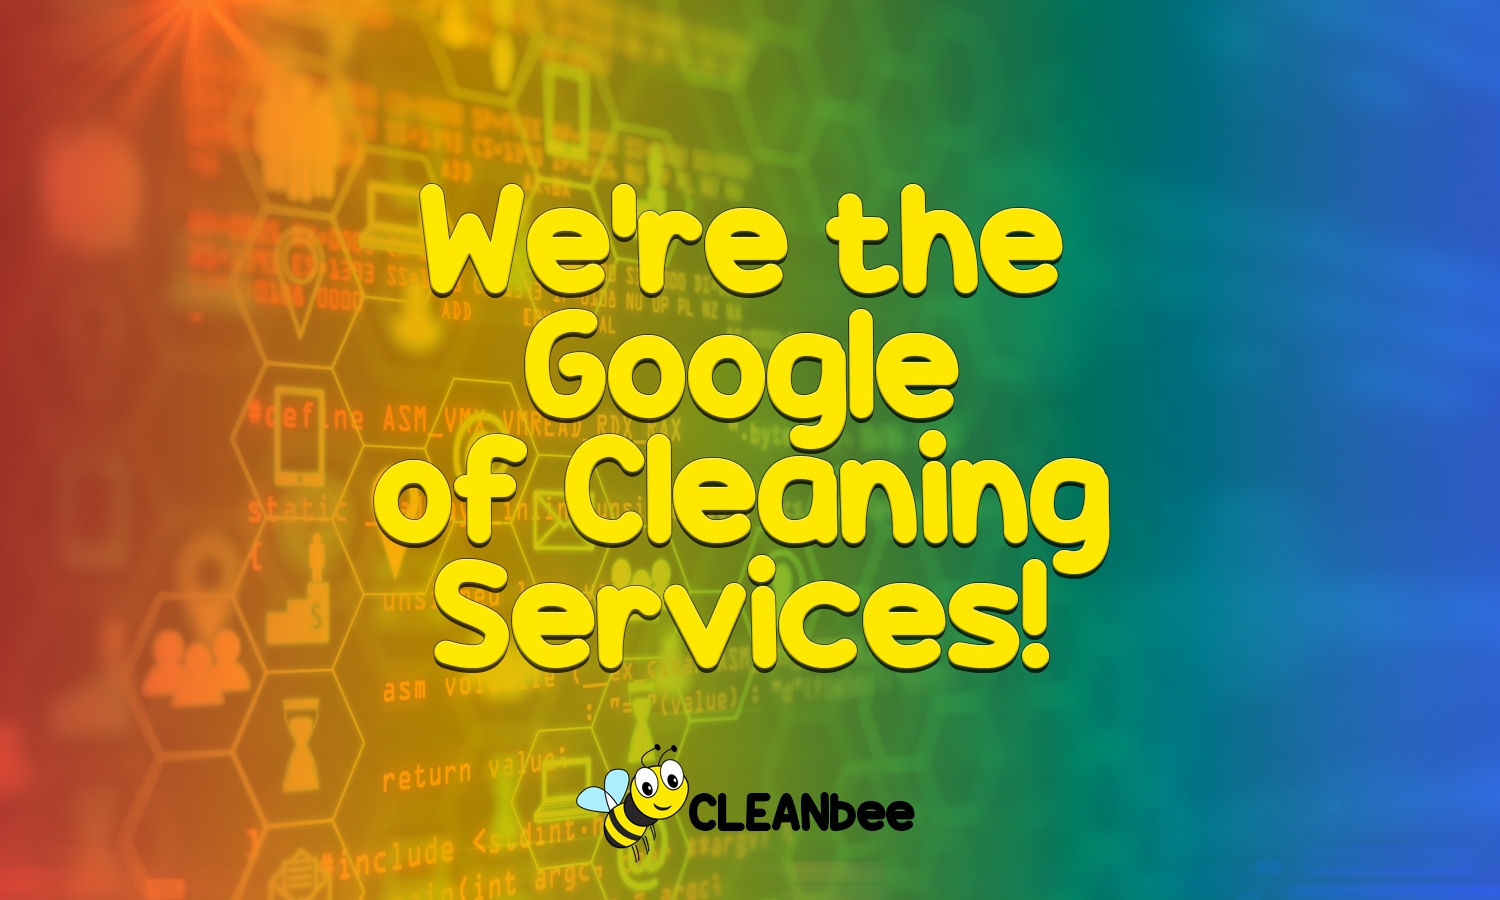 We're the Goggle Of Cleaning Services!